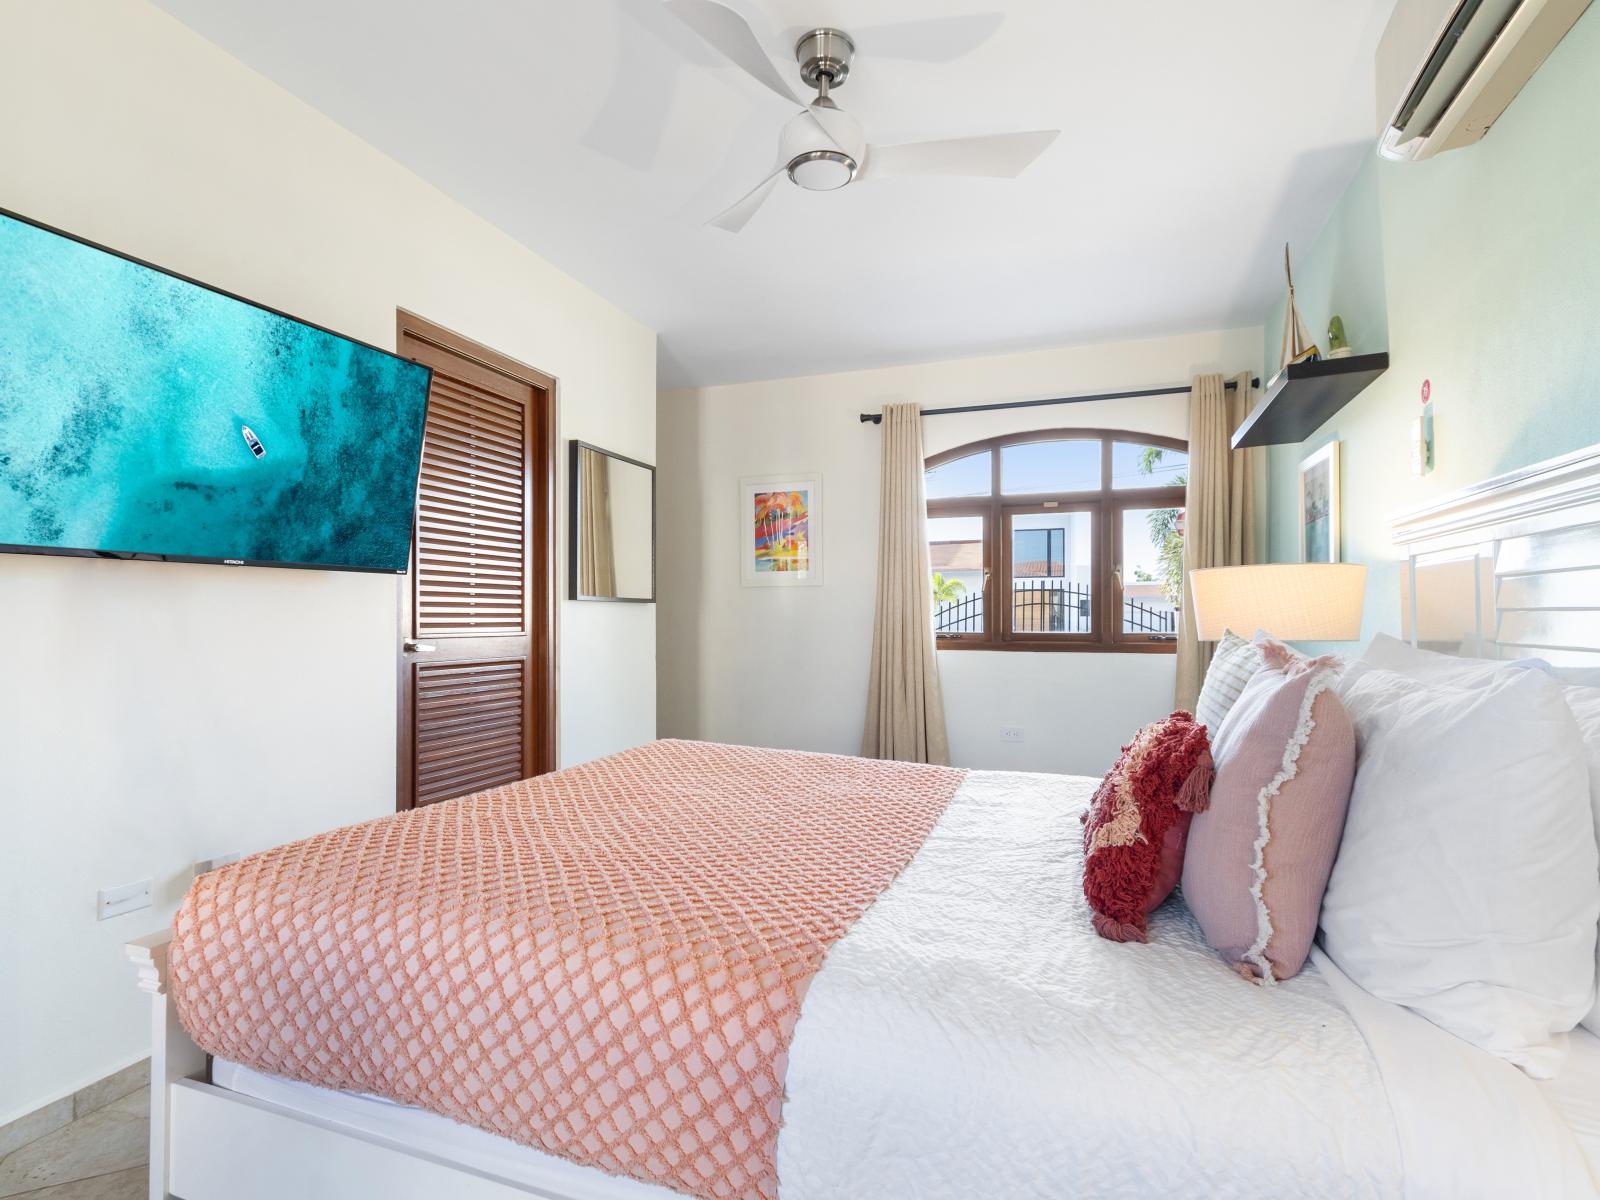 Bedroom 3 is equipped with a wall-mounted flat-screen TV for your entertainment.